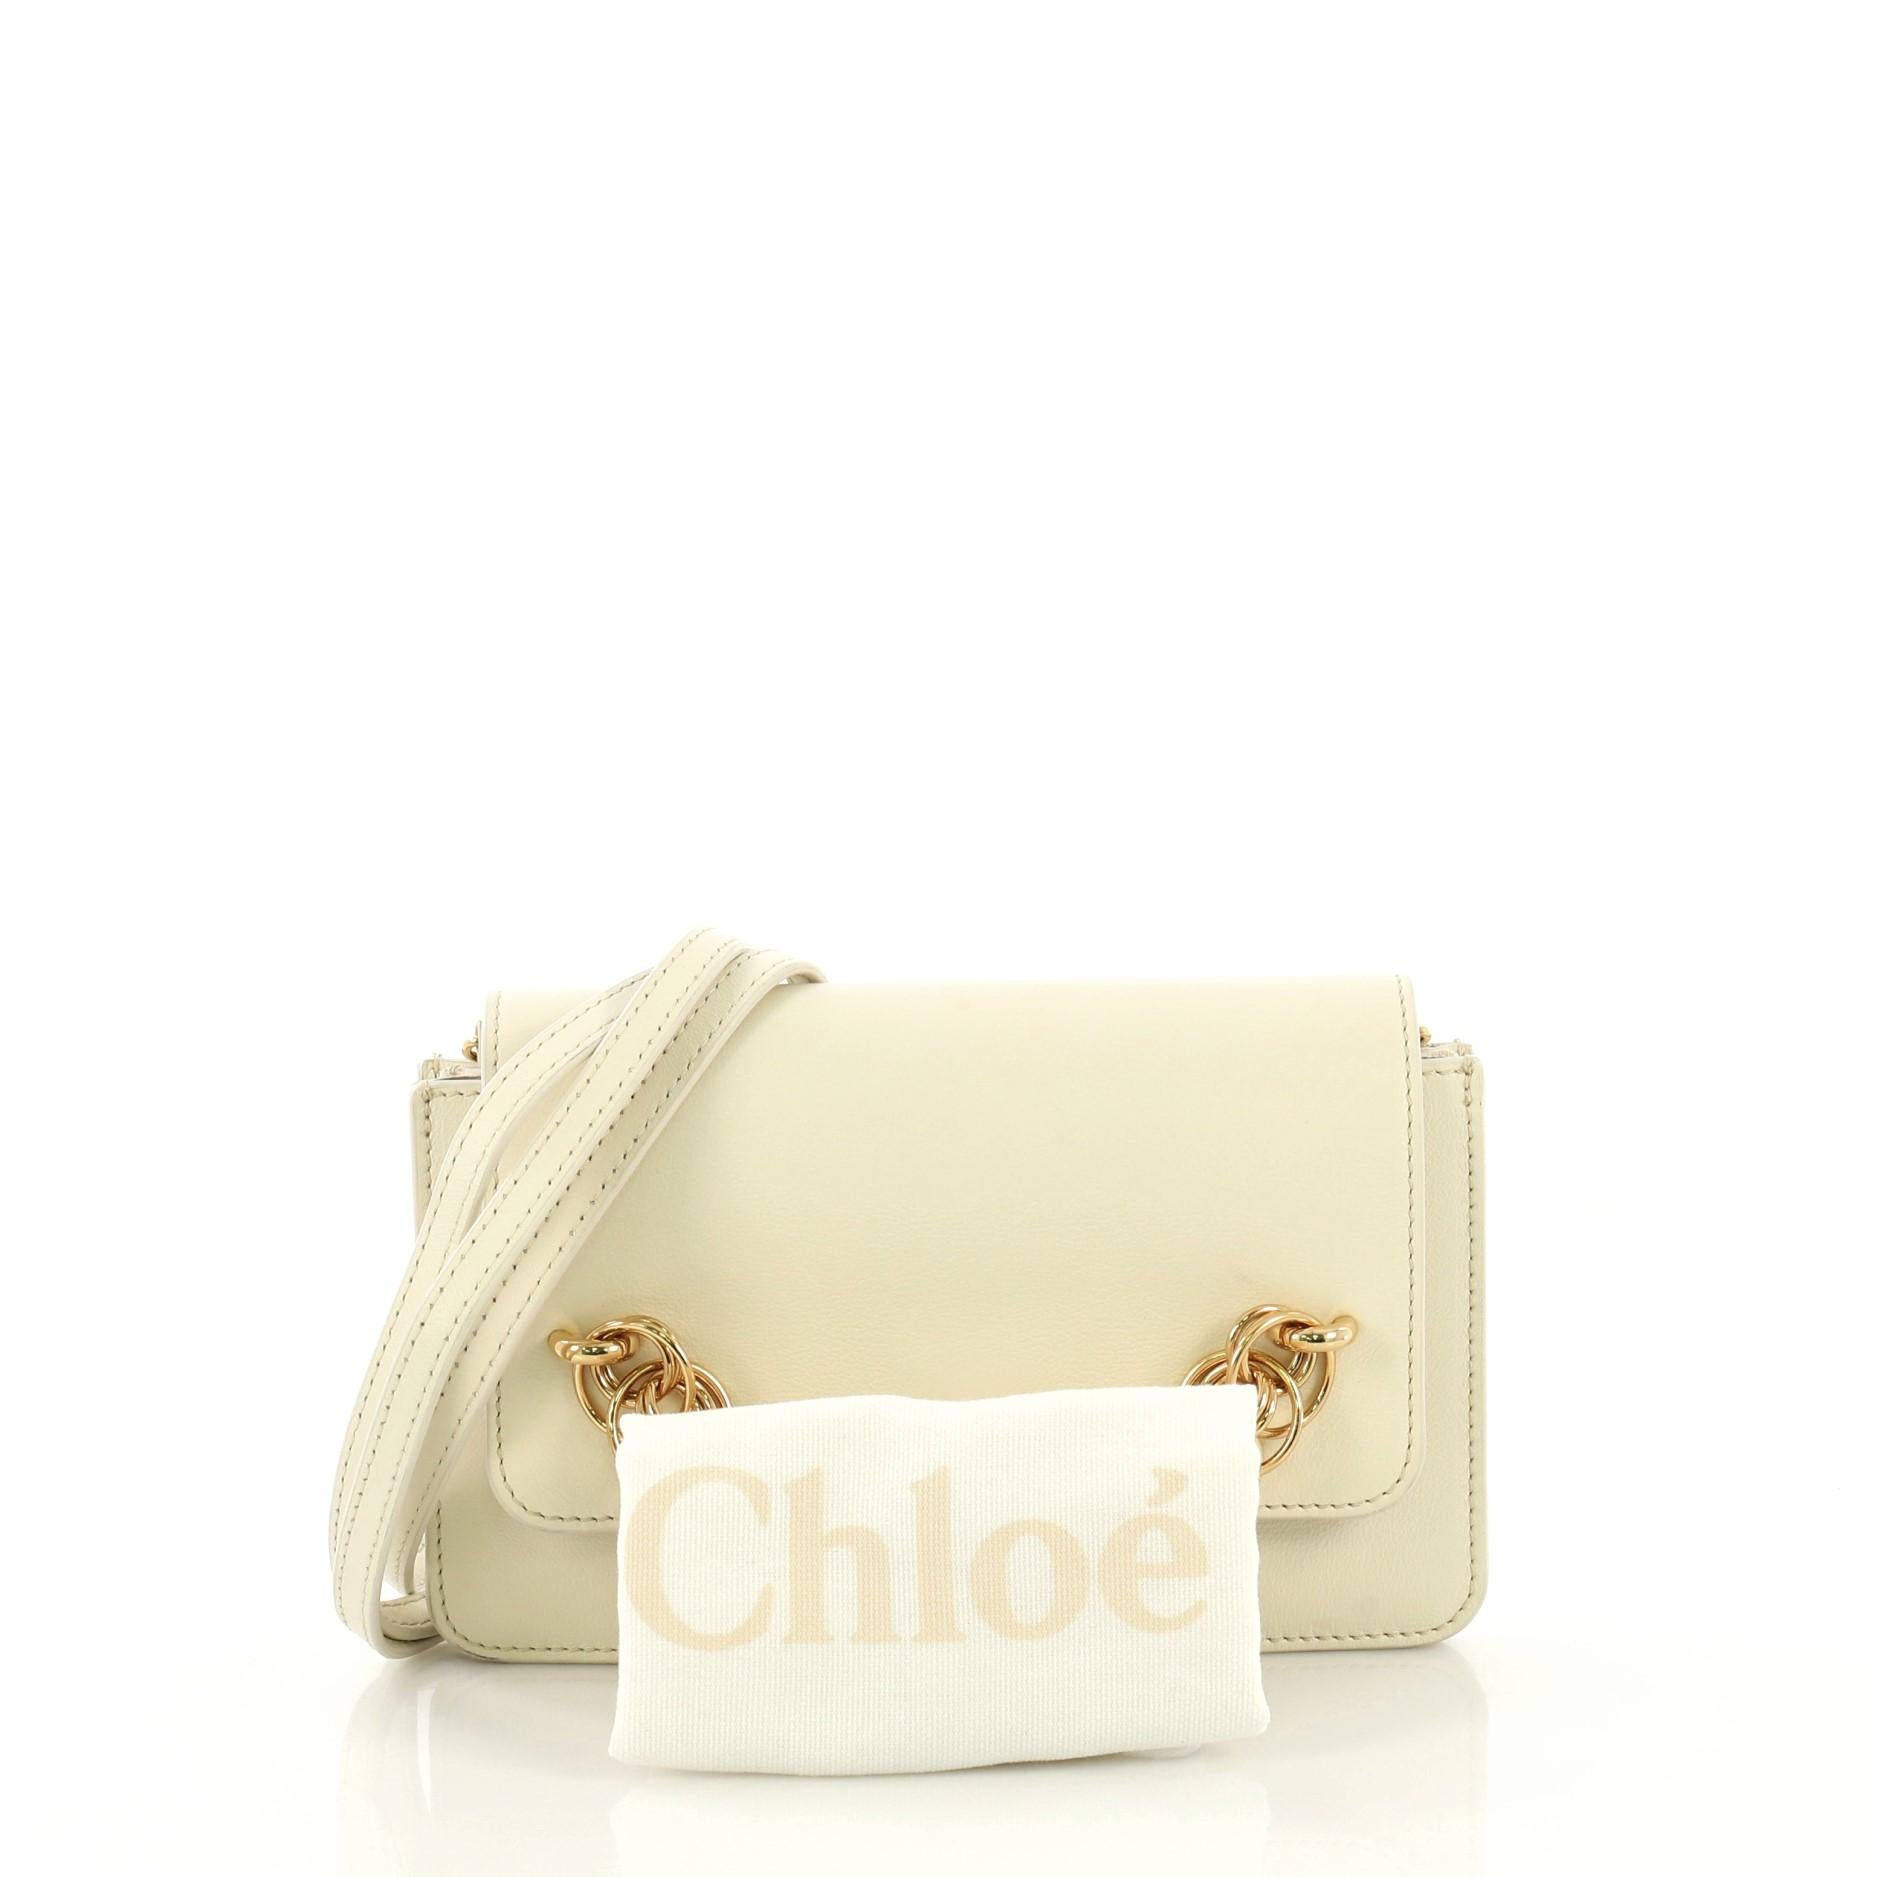 This Chloe Drew Bijou Clutch Leather, crafted in neutral leather, features a removable leather strap, bracelet-inspired chain link on its flap, and gold-tone hardware. Its magnetic snap closure opens to a neutral suede interior with three open